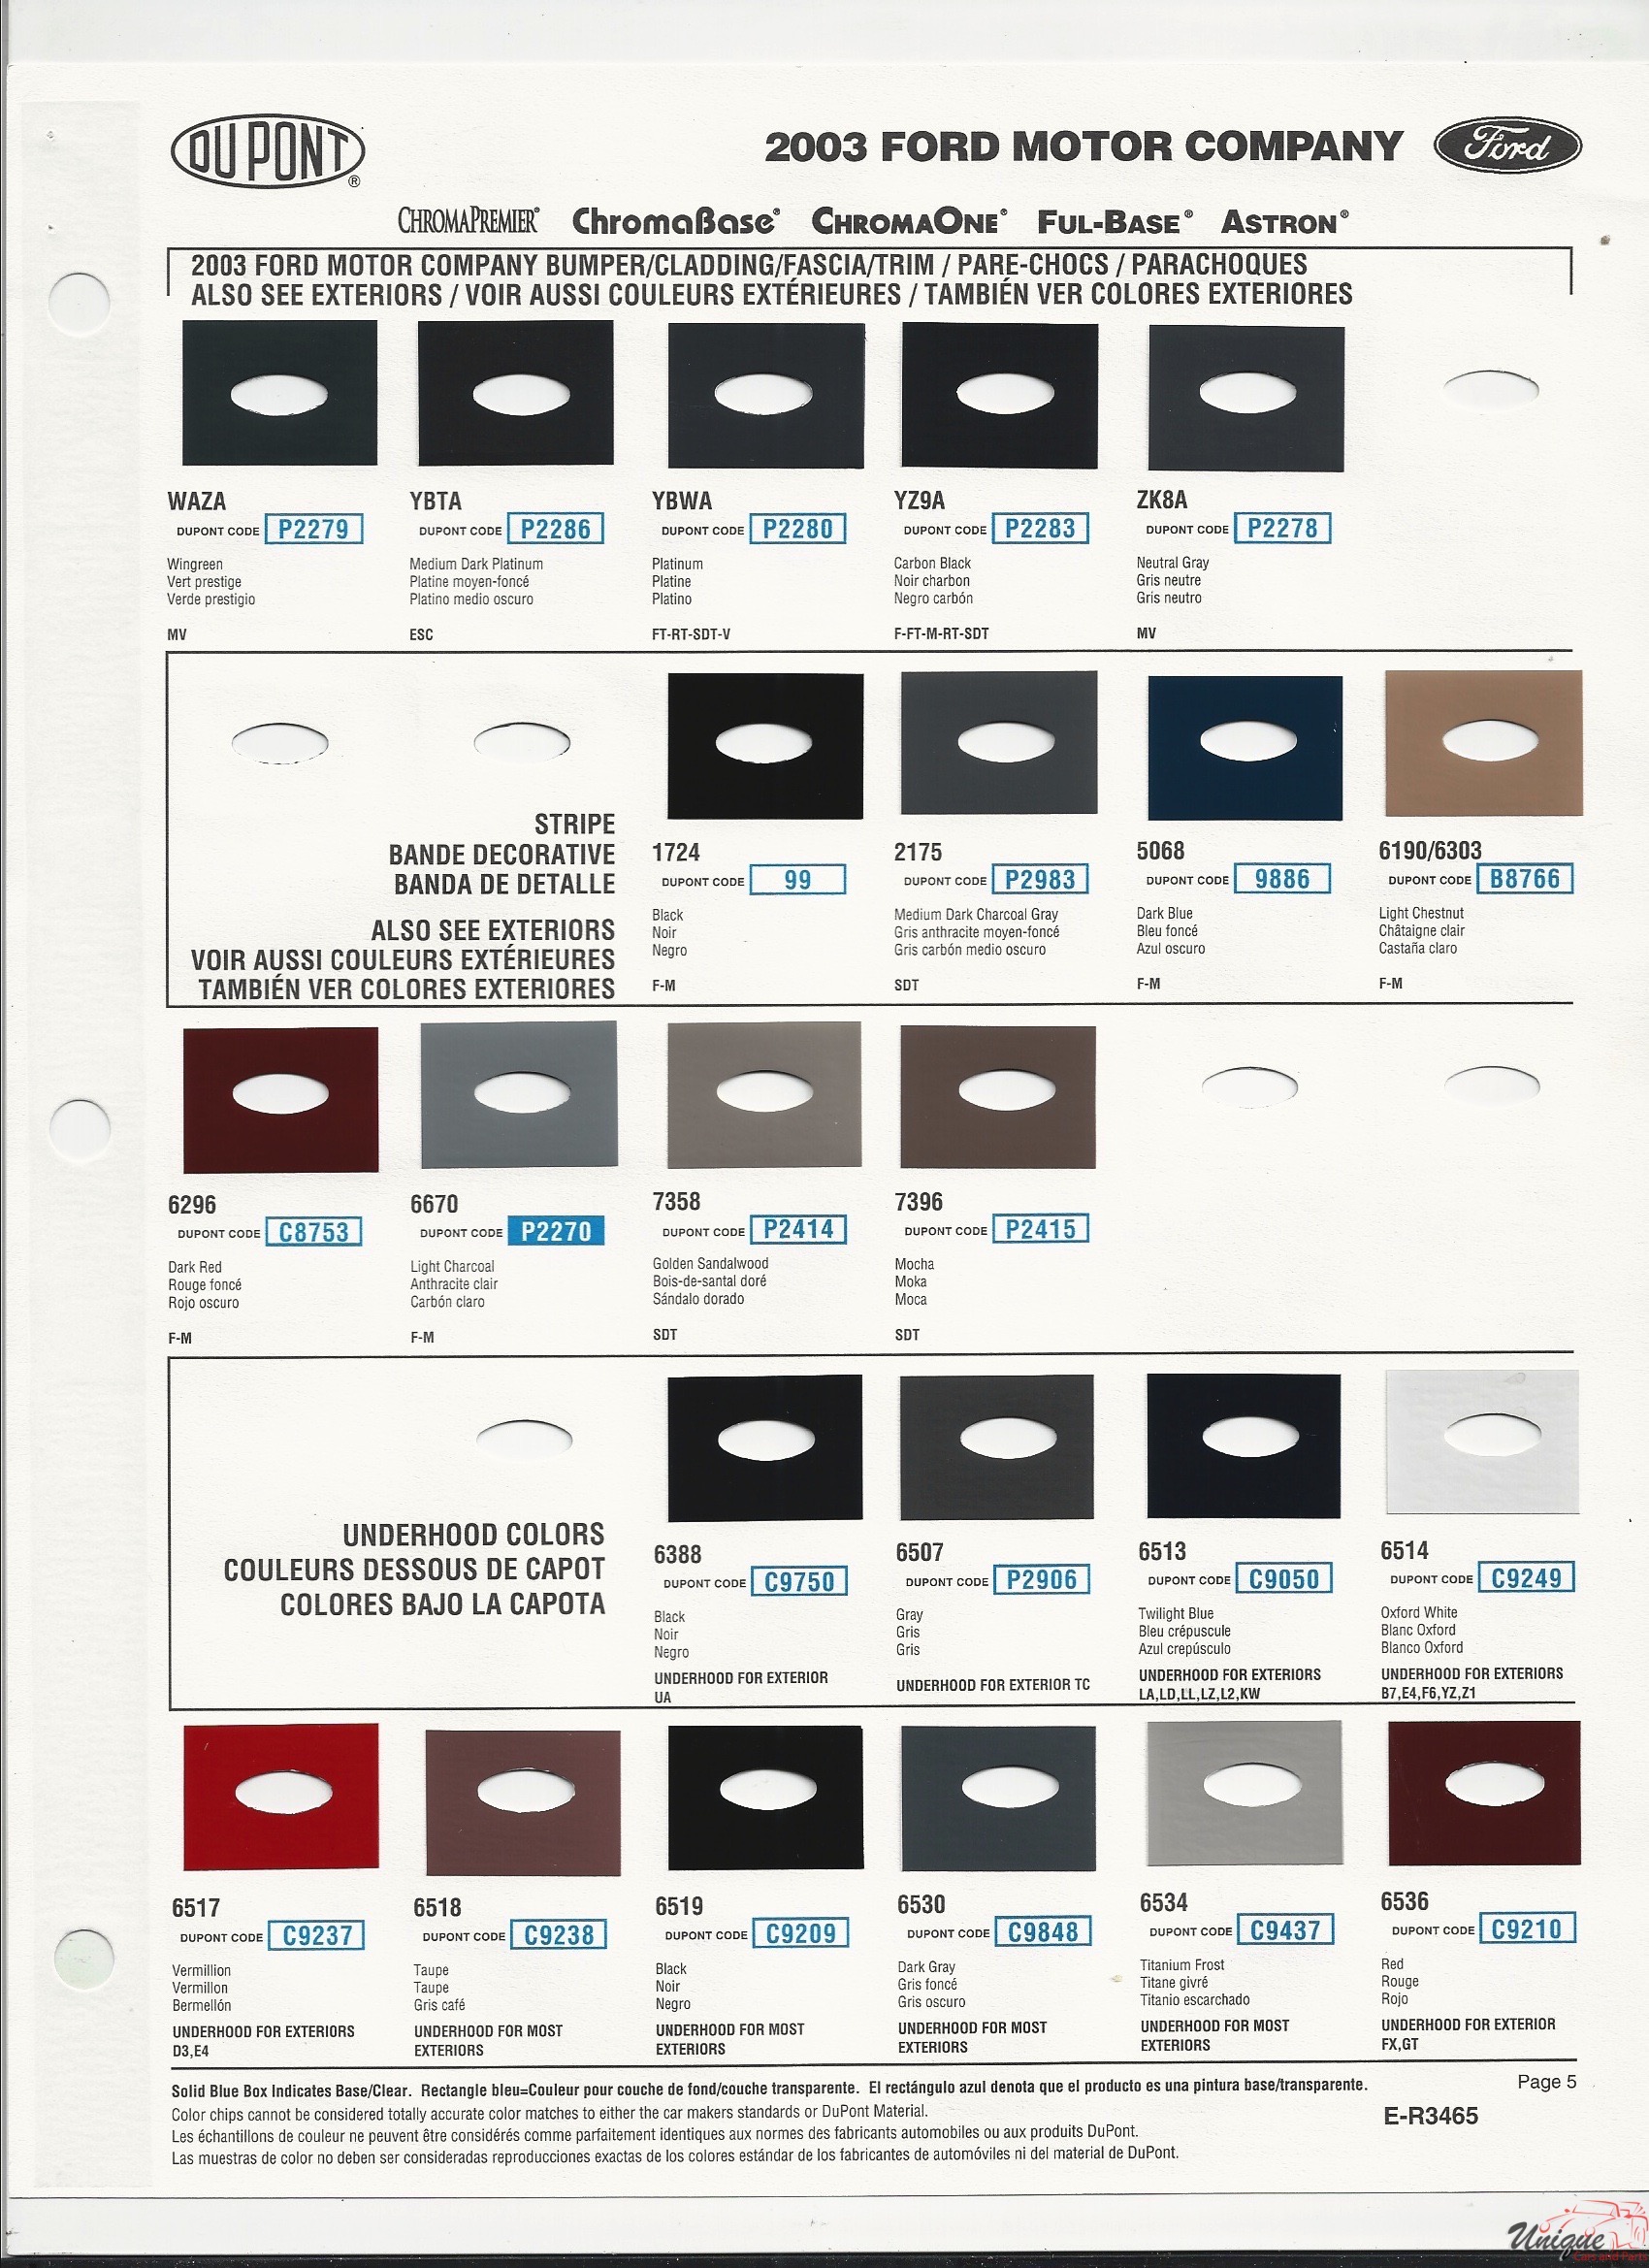 2003 Ford-4 Paint Charts